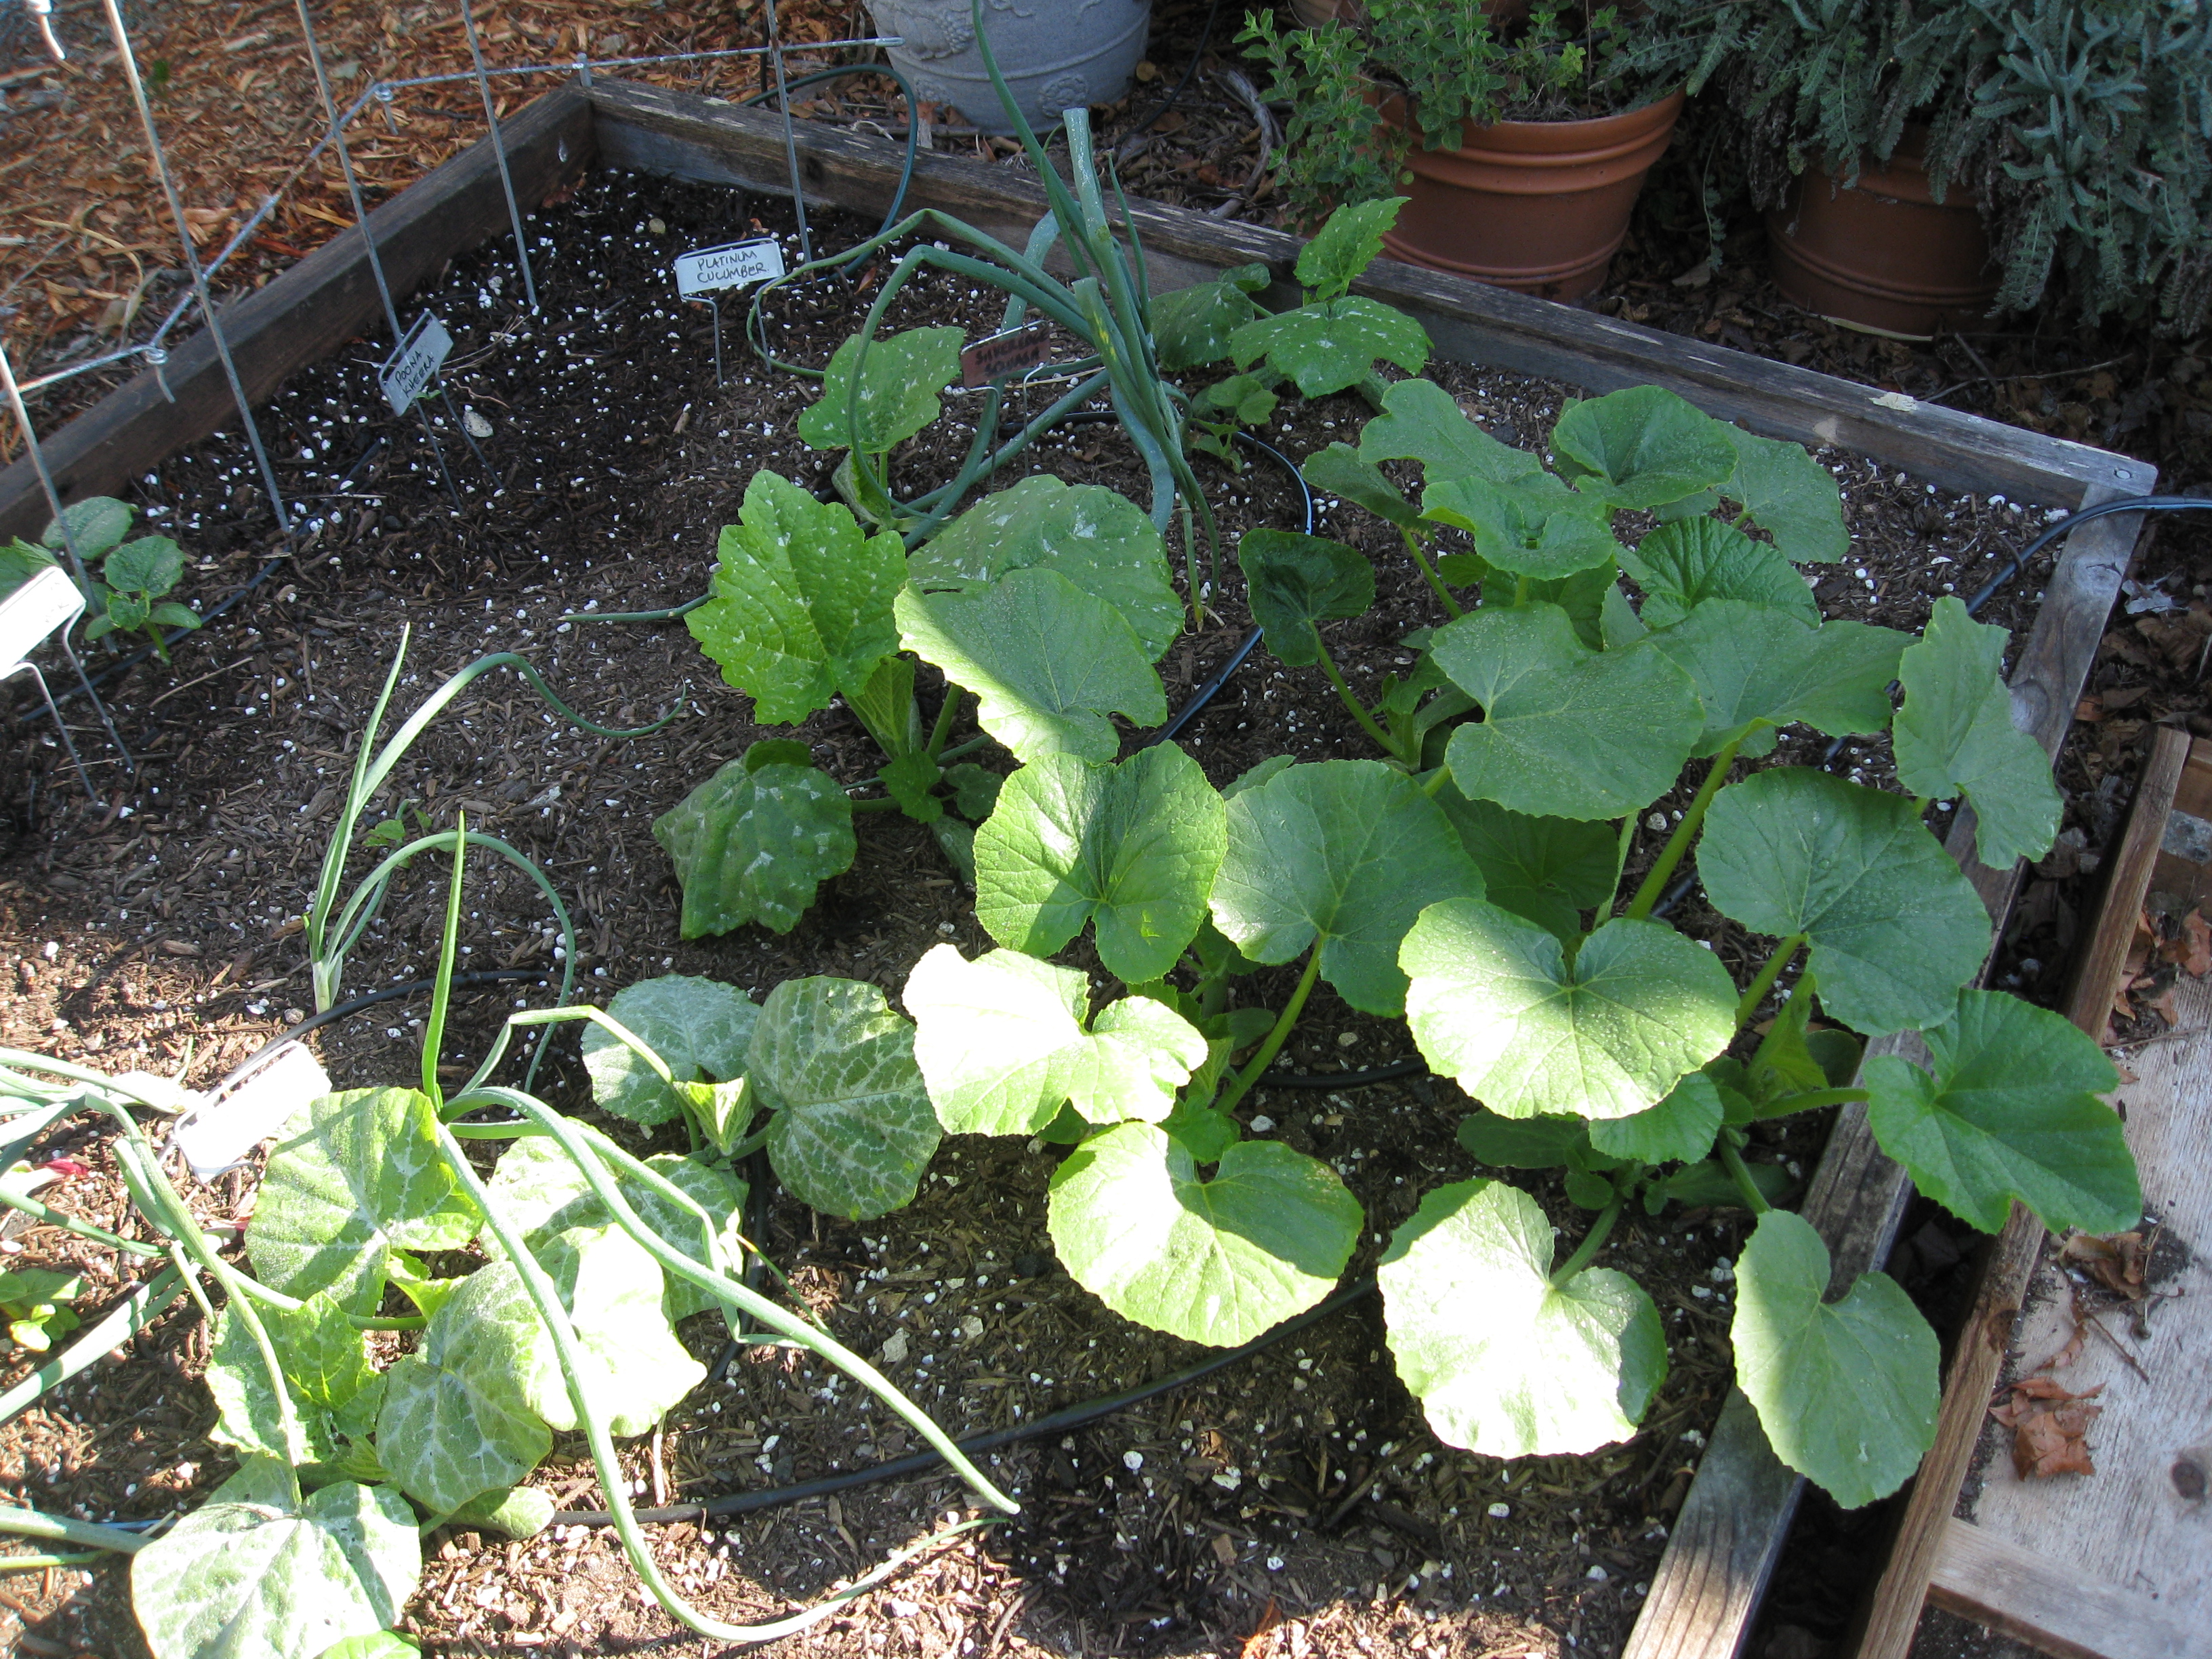 Winter squash and cucumbers start to take over a garden bed.